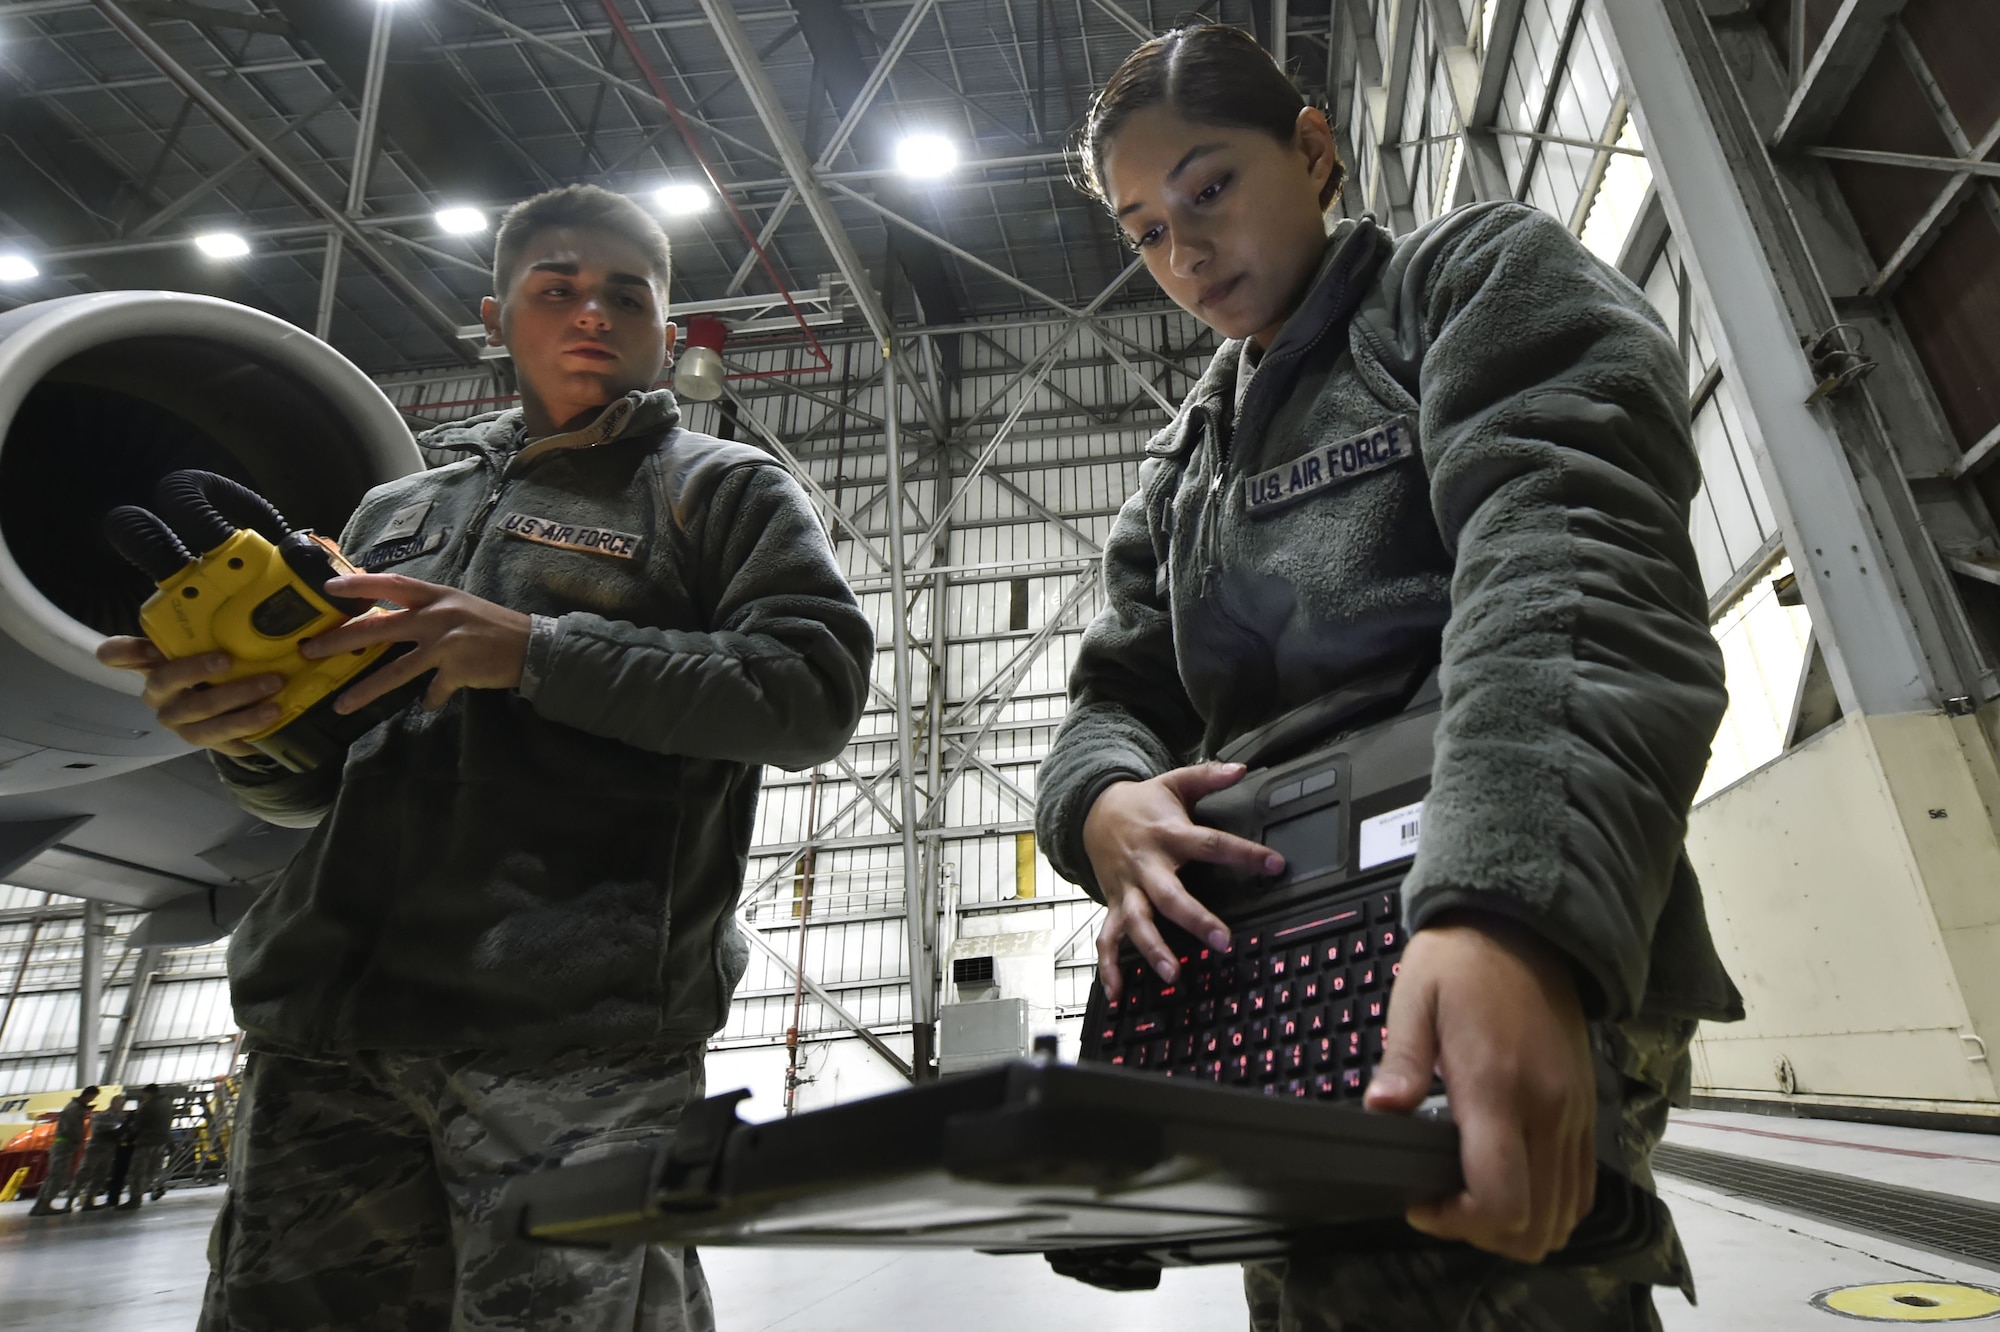 Airman 1st Class Richard Johnson, left, and Airman 1st Class Yasuary Martinez, both 437th Aircraft Maintenance Squadron aerospace maintenance journeymen, perform ground maintenance on a C-17 Globemaster III in preparation for a Joint Forcible Entry training event in support of the U.S. Air Force Weapons School Integration phase Dec. 8. Thirty seven C-17s, 21 C-130 Hercules and 120 U.S. Army paratroopers participated in the mobility portion of the WSINT phase during a simulated mass JFE event over a contested target Dec. 9, on a range near Nellis Air Force Base, Nev. The event demonstrates the U.S. Air Force’s ability to execute rapid, decisive responses to crises worldwide.